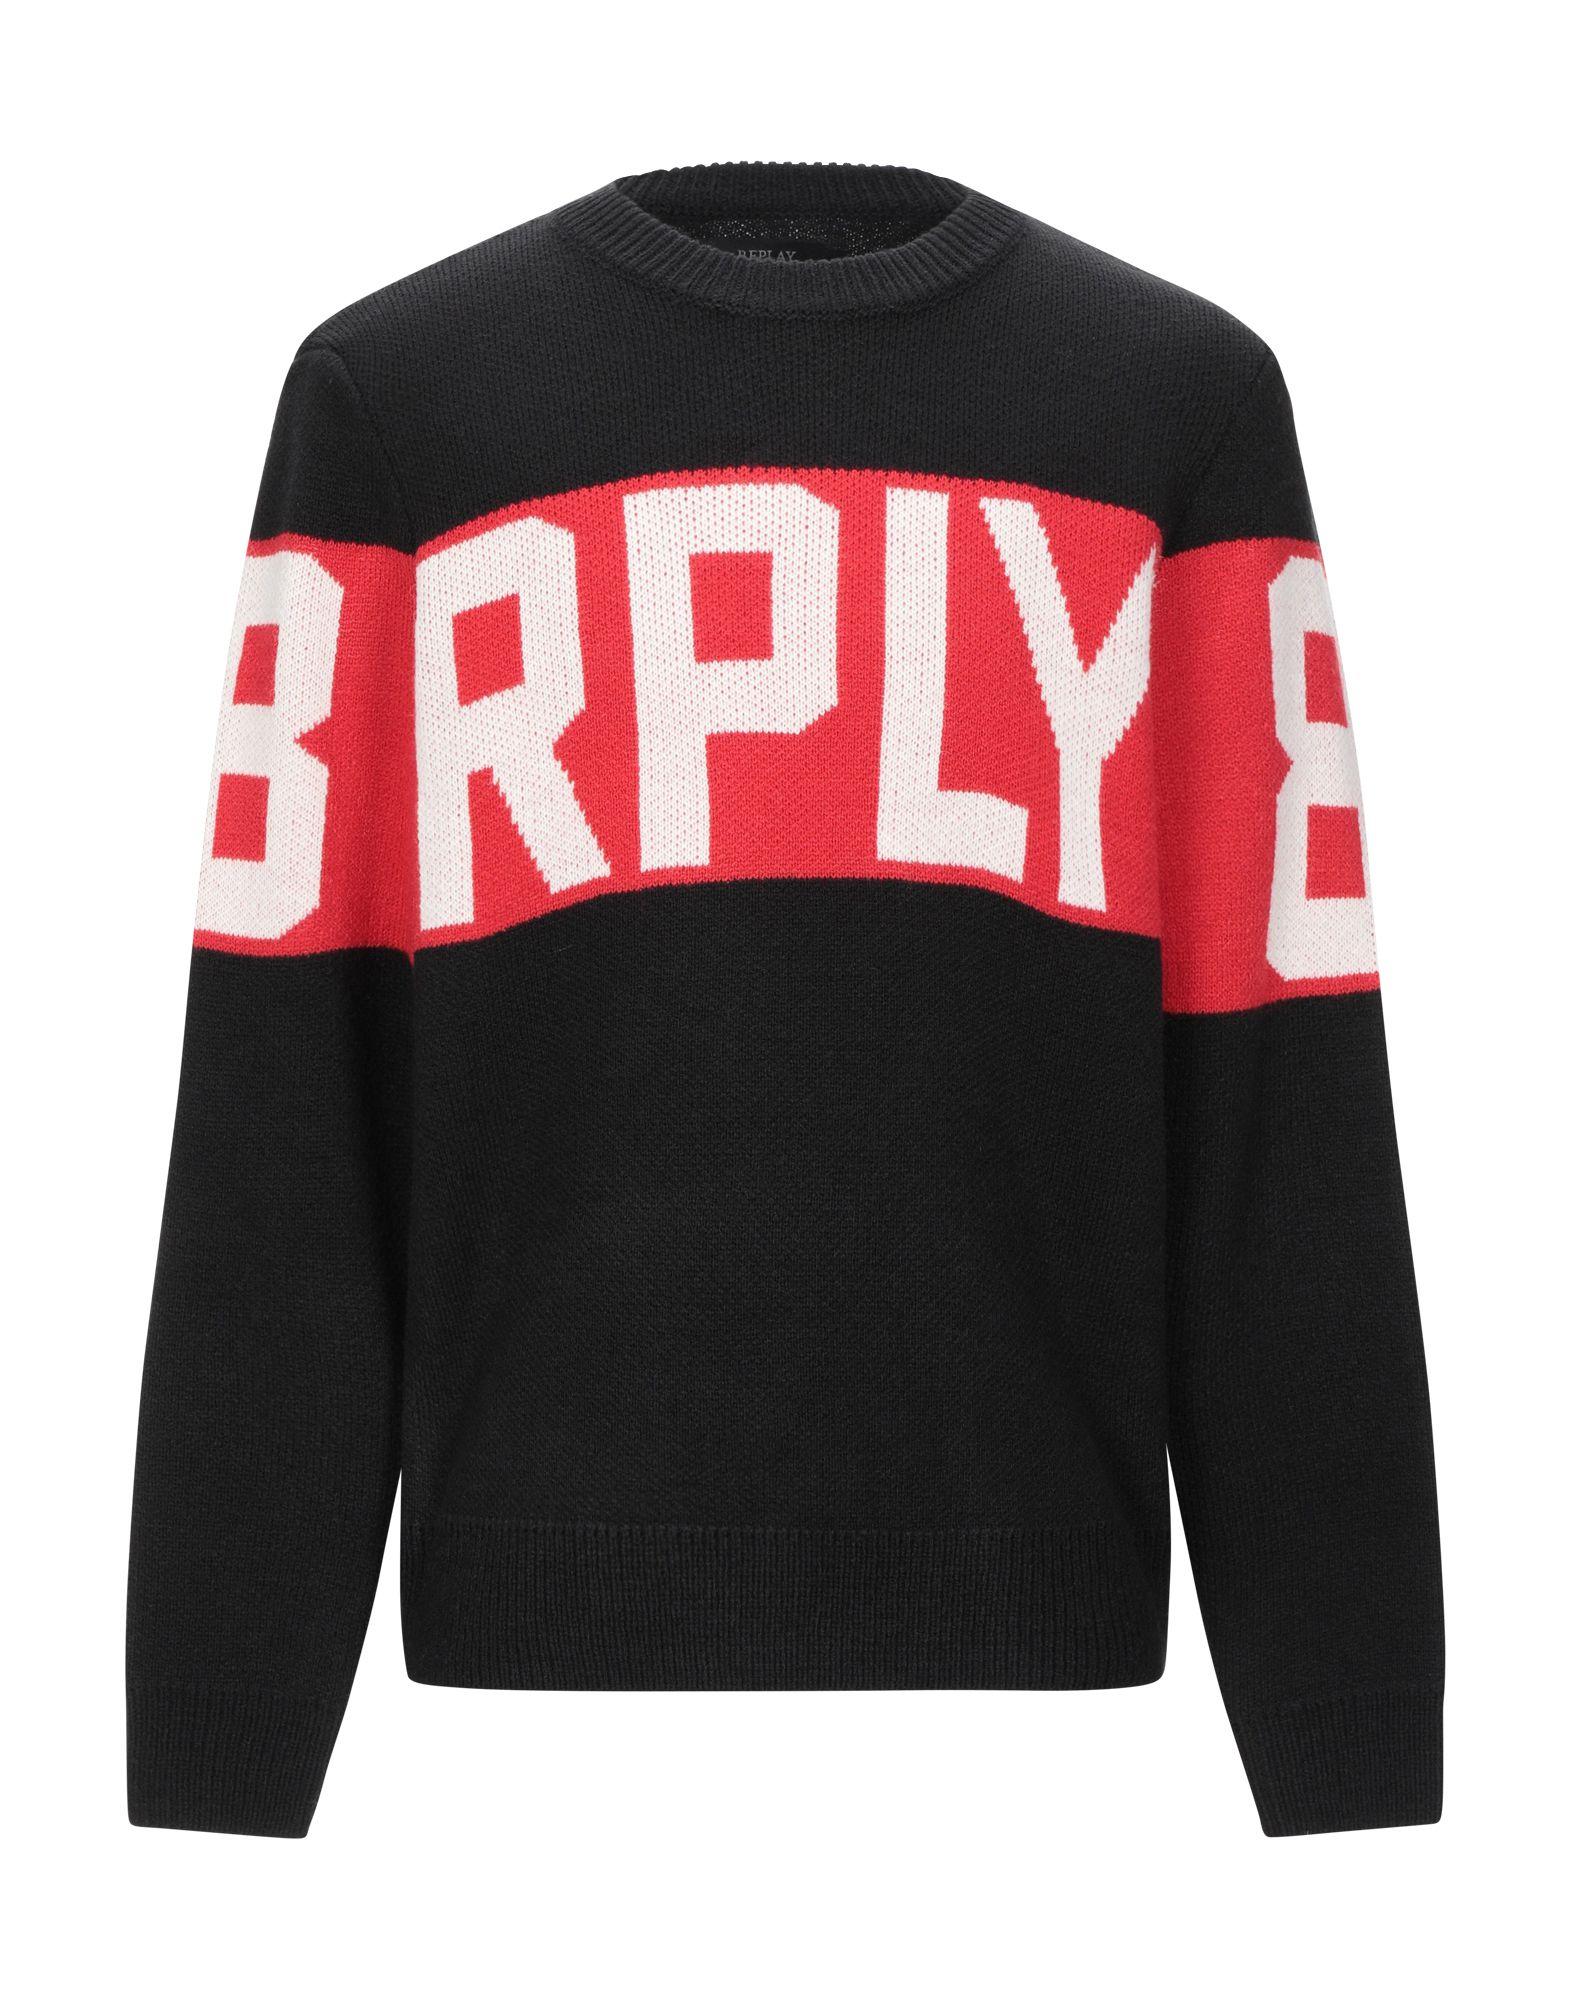 Replay Sweater in Black for Men - Lyst